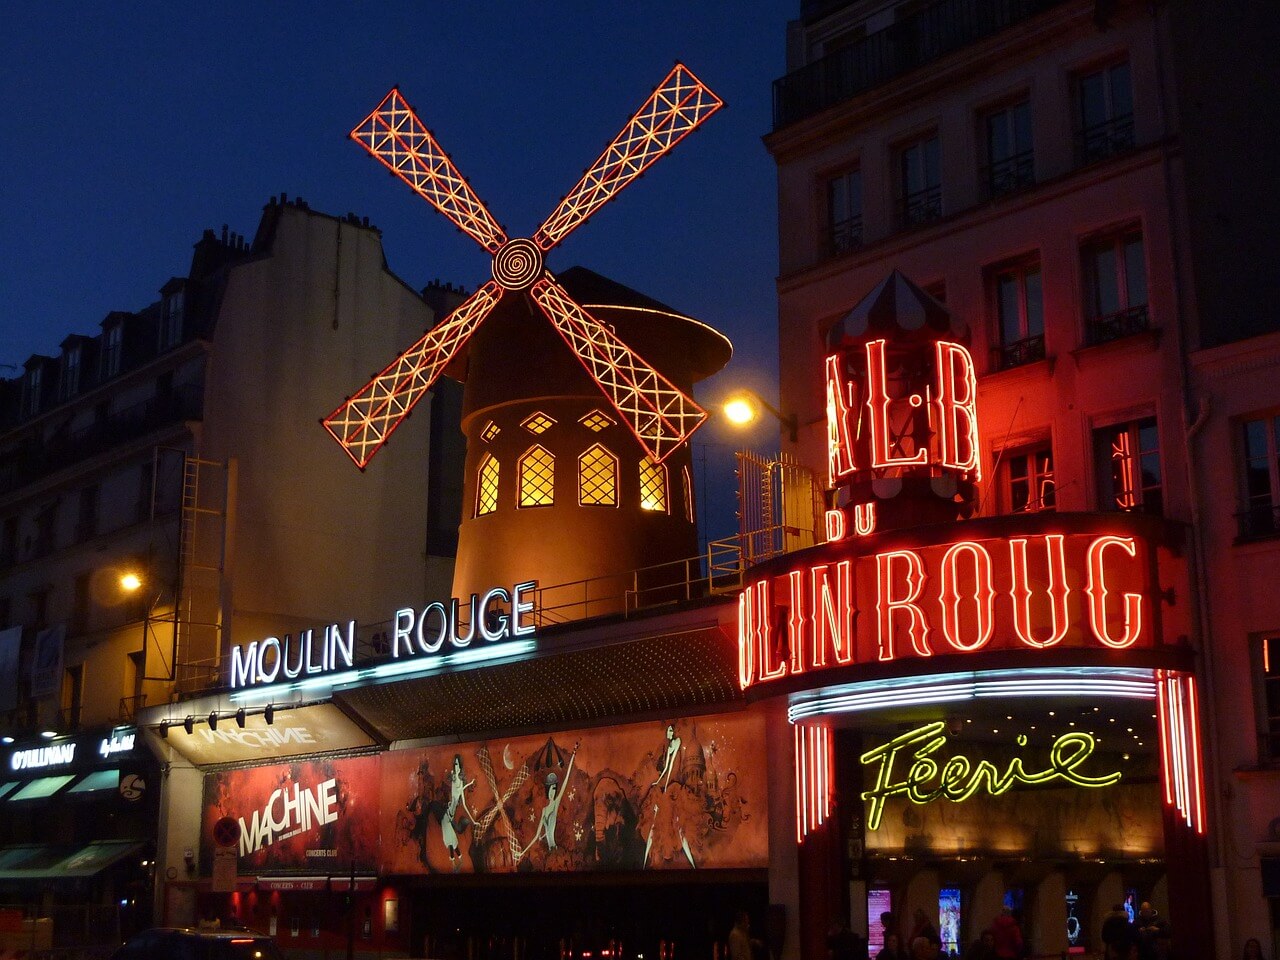 an image of the Moulin Rouge